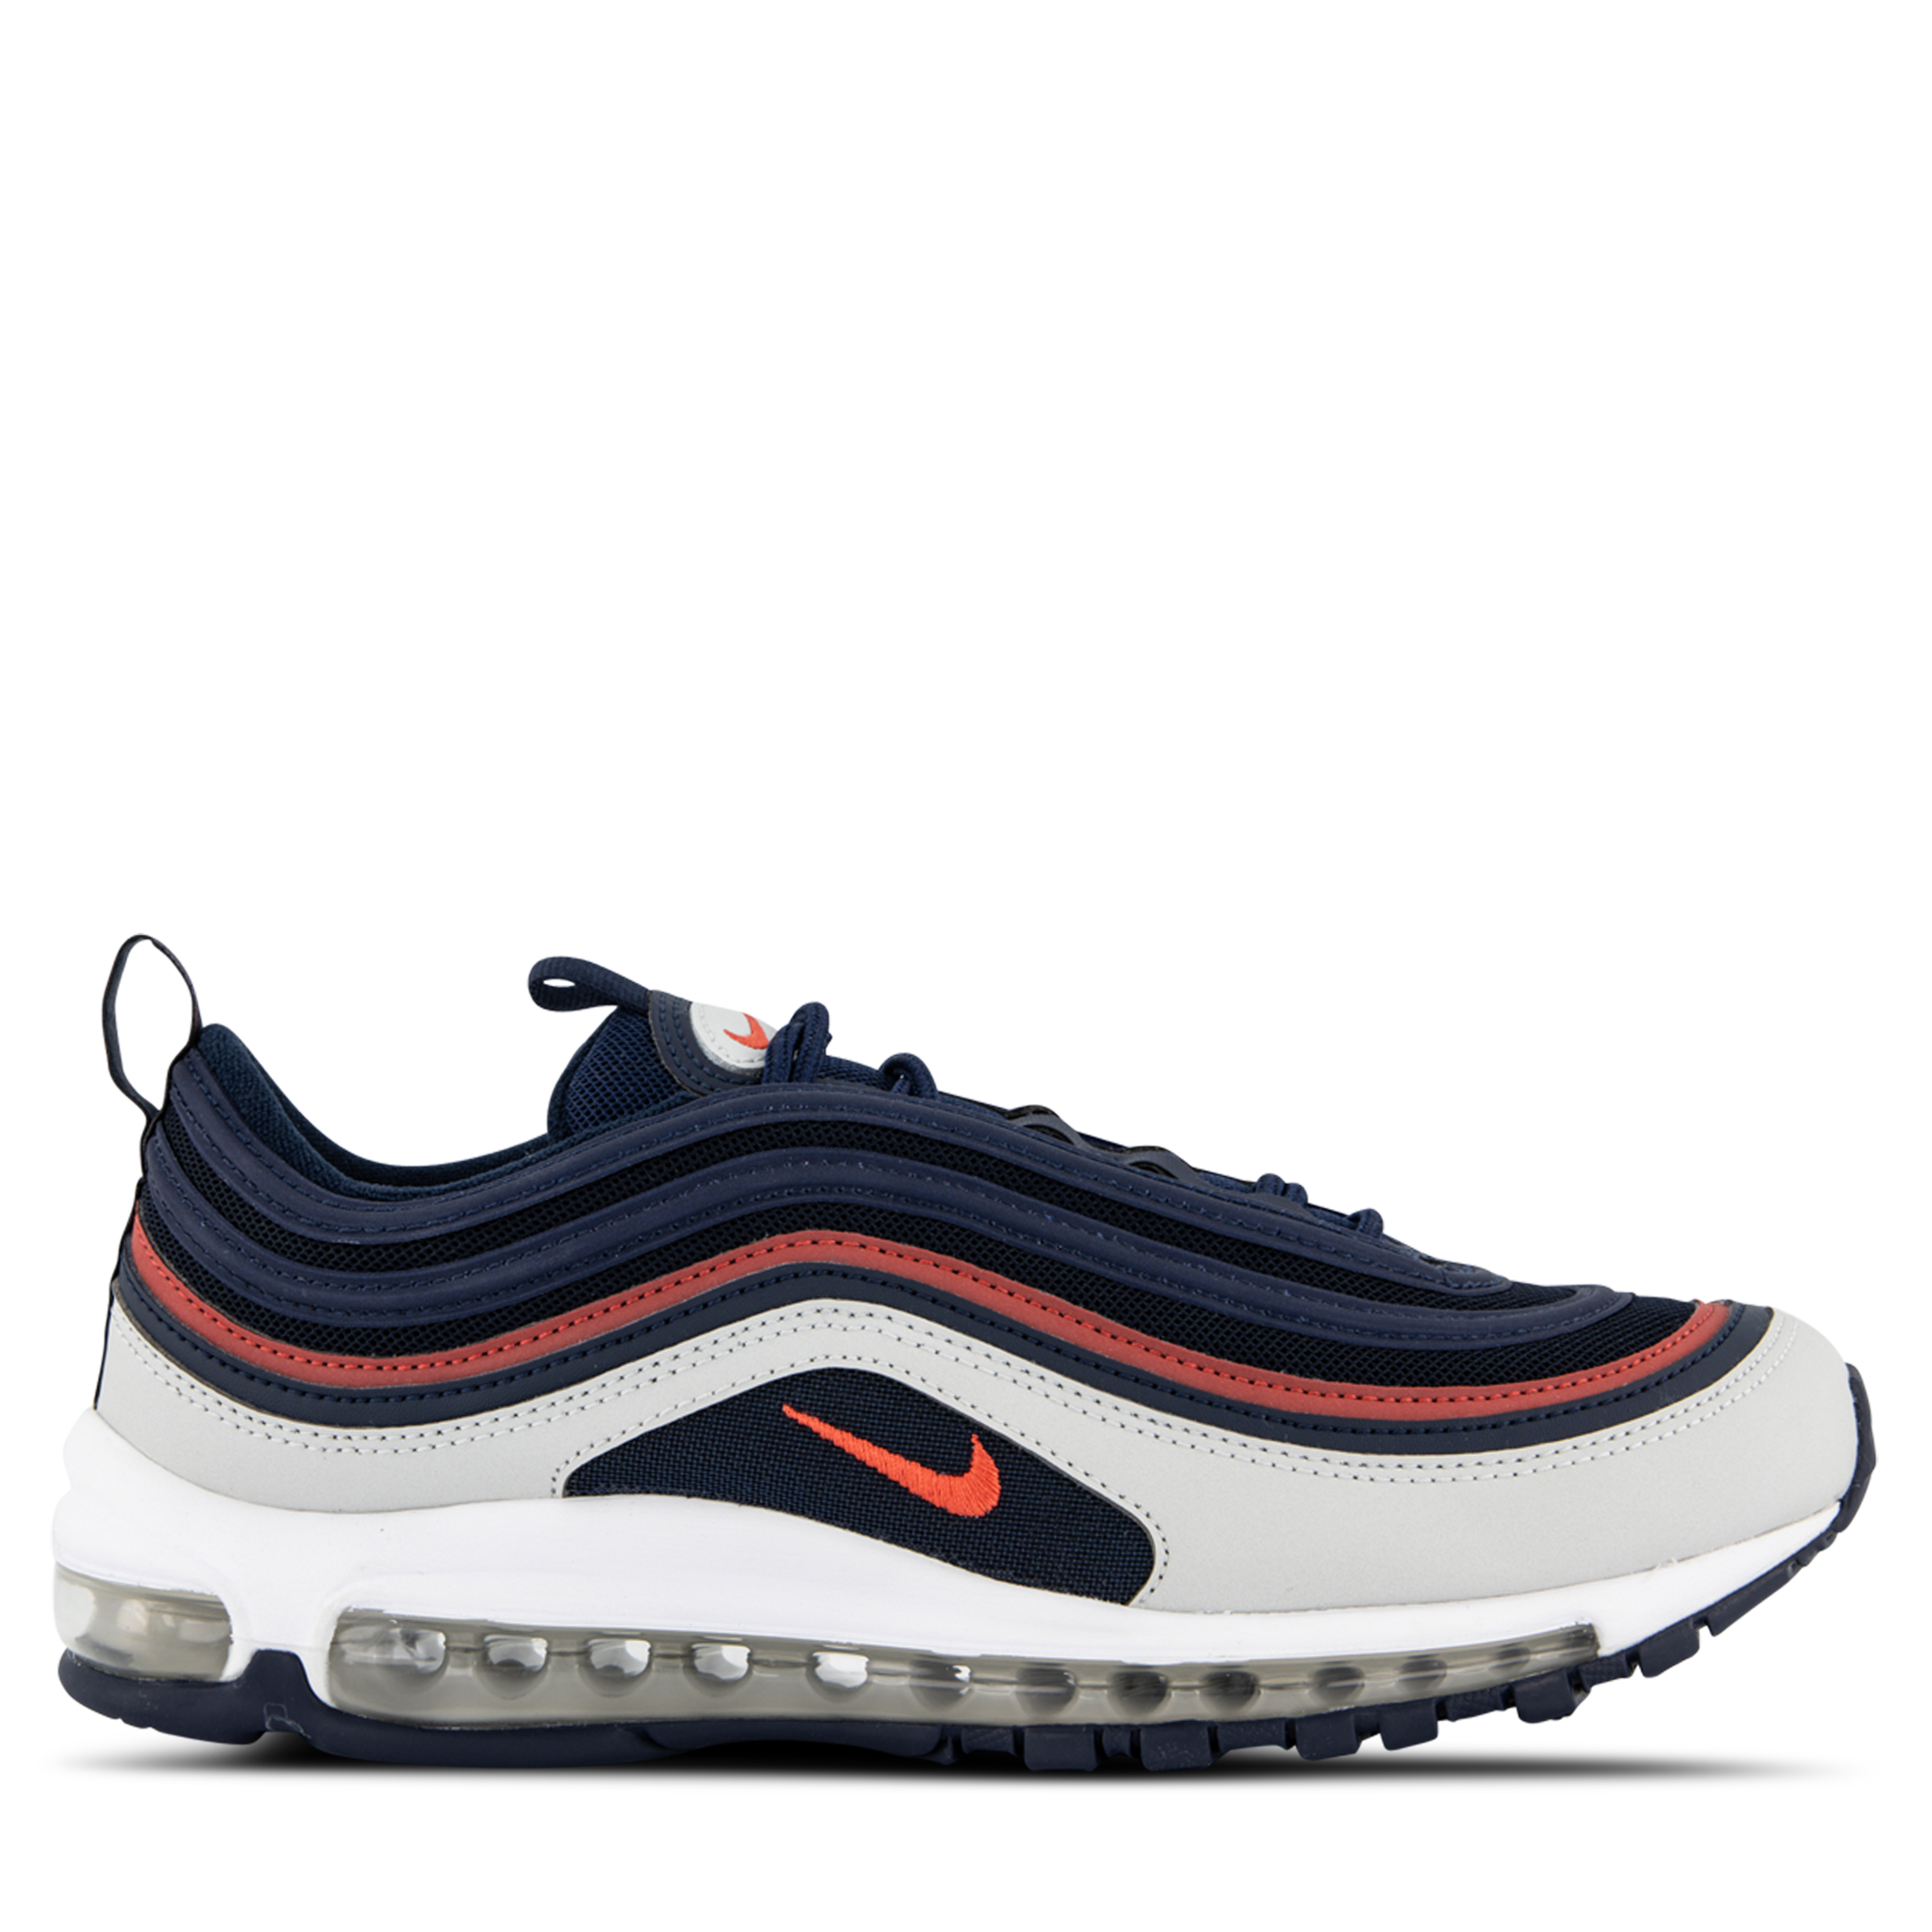 Nike Air Max 97 Midnight Navy/Track Red/Obsidian | Hype DC